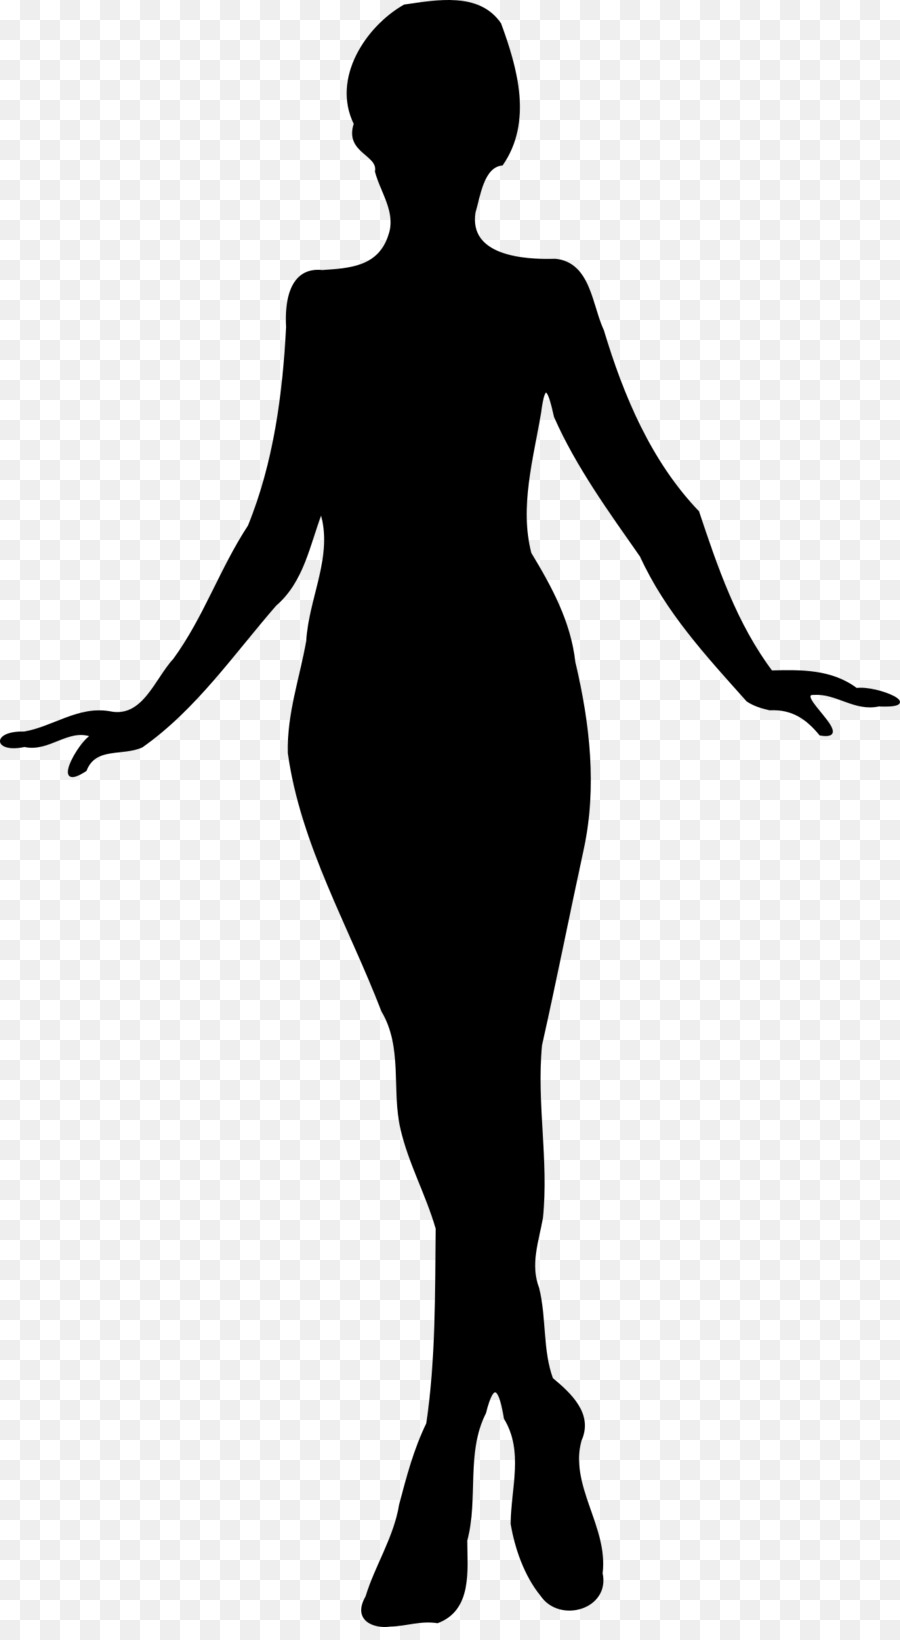 Free Lady Silhouette Clipart, Download Free Lady Silhouette Clipart png ...